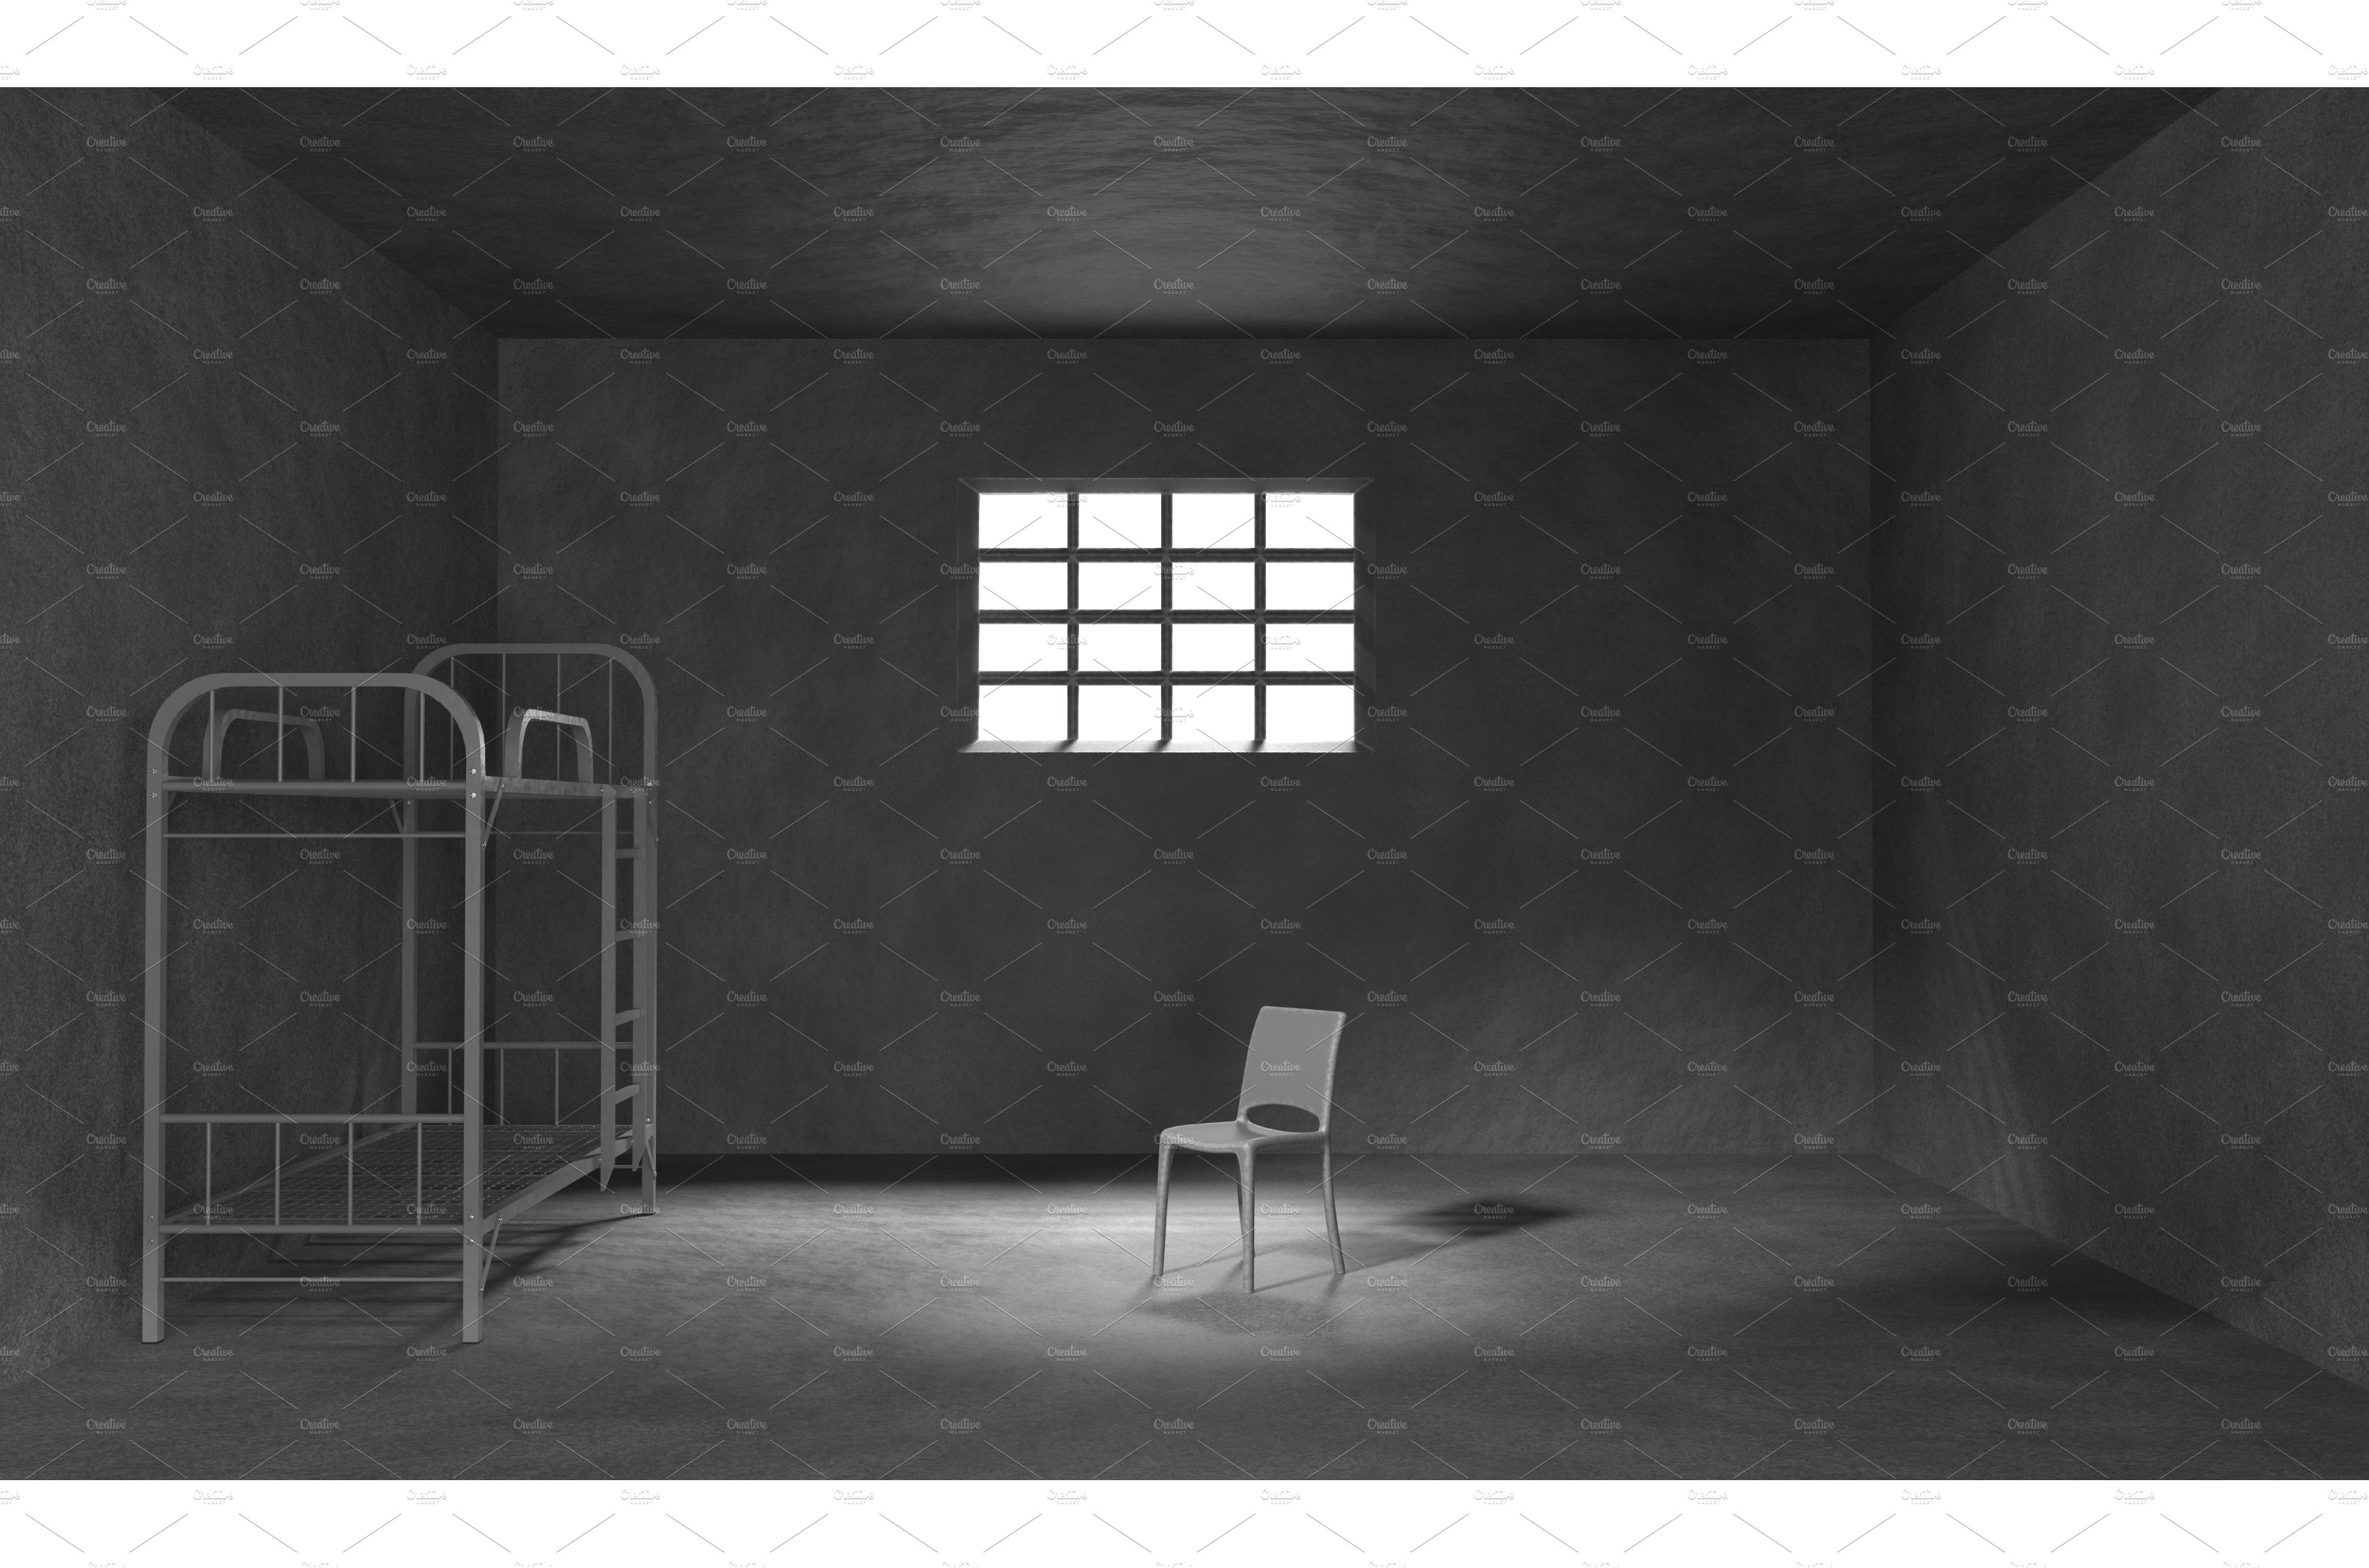 Dark prison cell with bunk bed cover image.